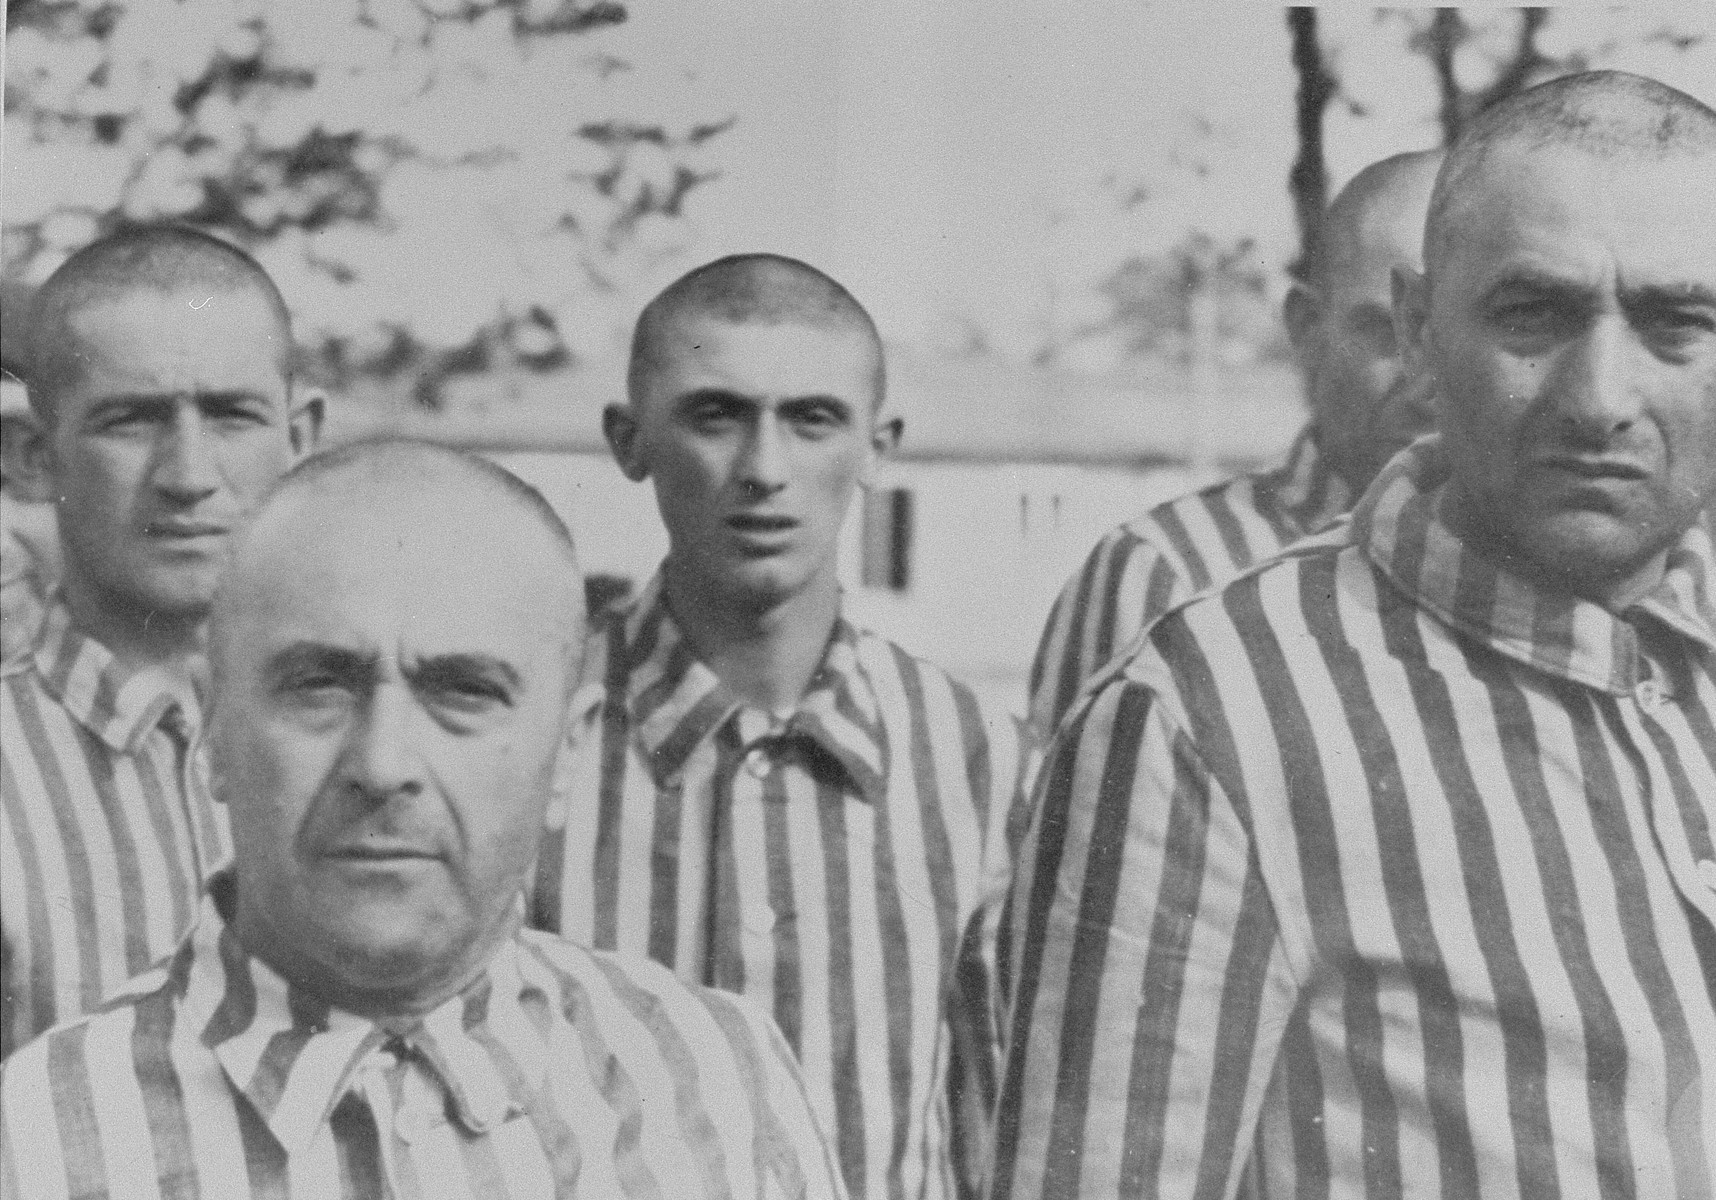 Jewish men from Subcarpathian Rus who have been, selected for forced labor at Auschwitz-Birkenau, stand in their newly issued prison uniforms at a roll call. 

Among those pictured is Istvan Balaszo, a pharmacist from Tecso (left).  Next to him is Itzchak Azik Smilovics, and behind them is Moshe Vogel.